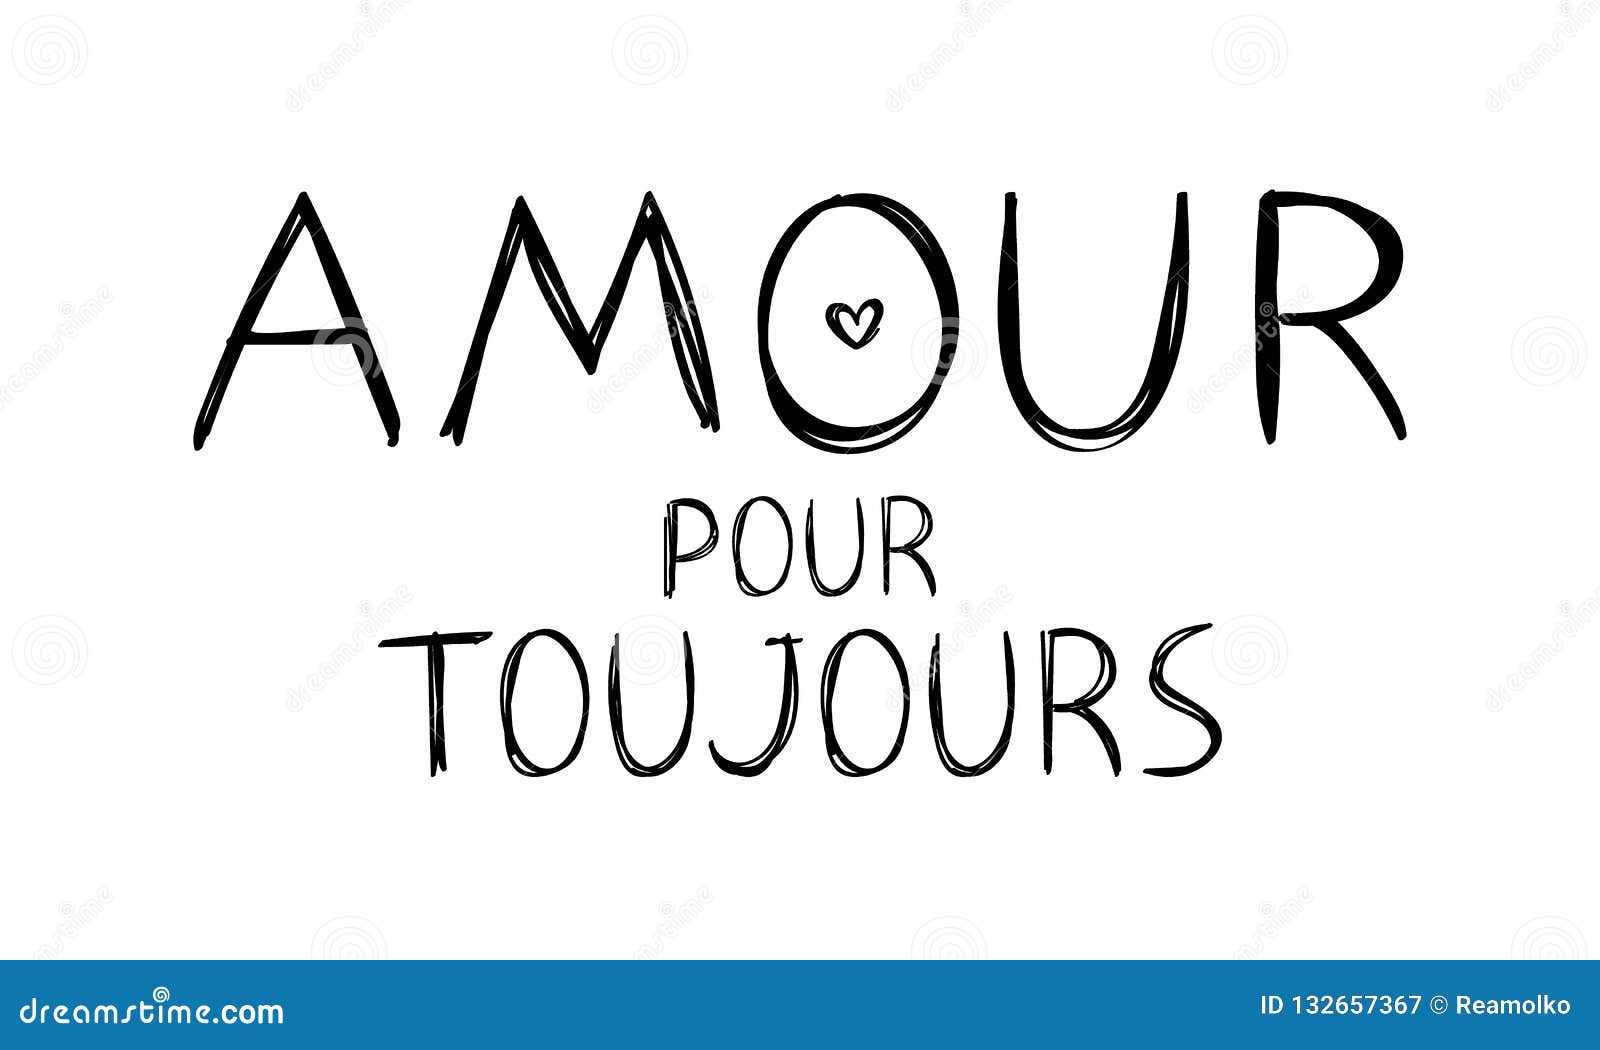 amour pour toujours - love forever - message in french for valentine`s day s.